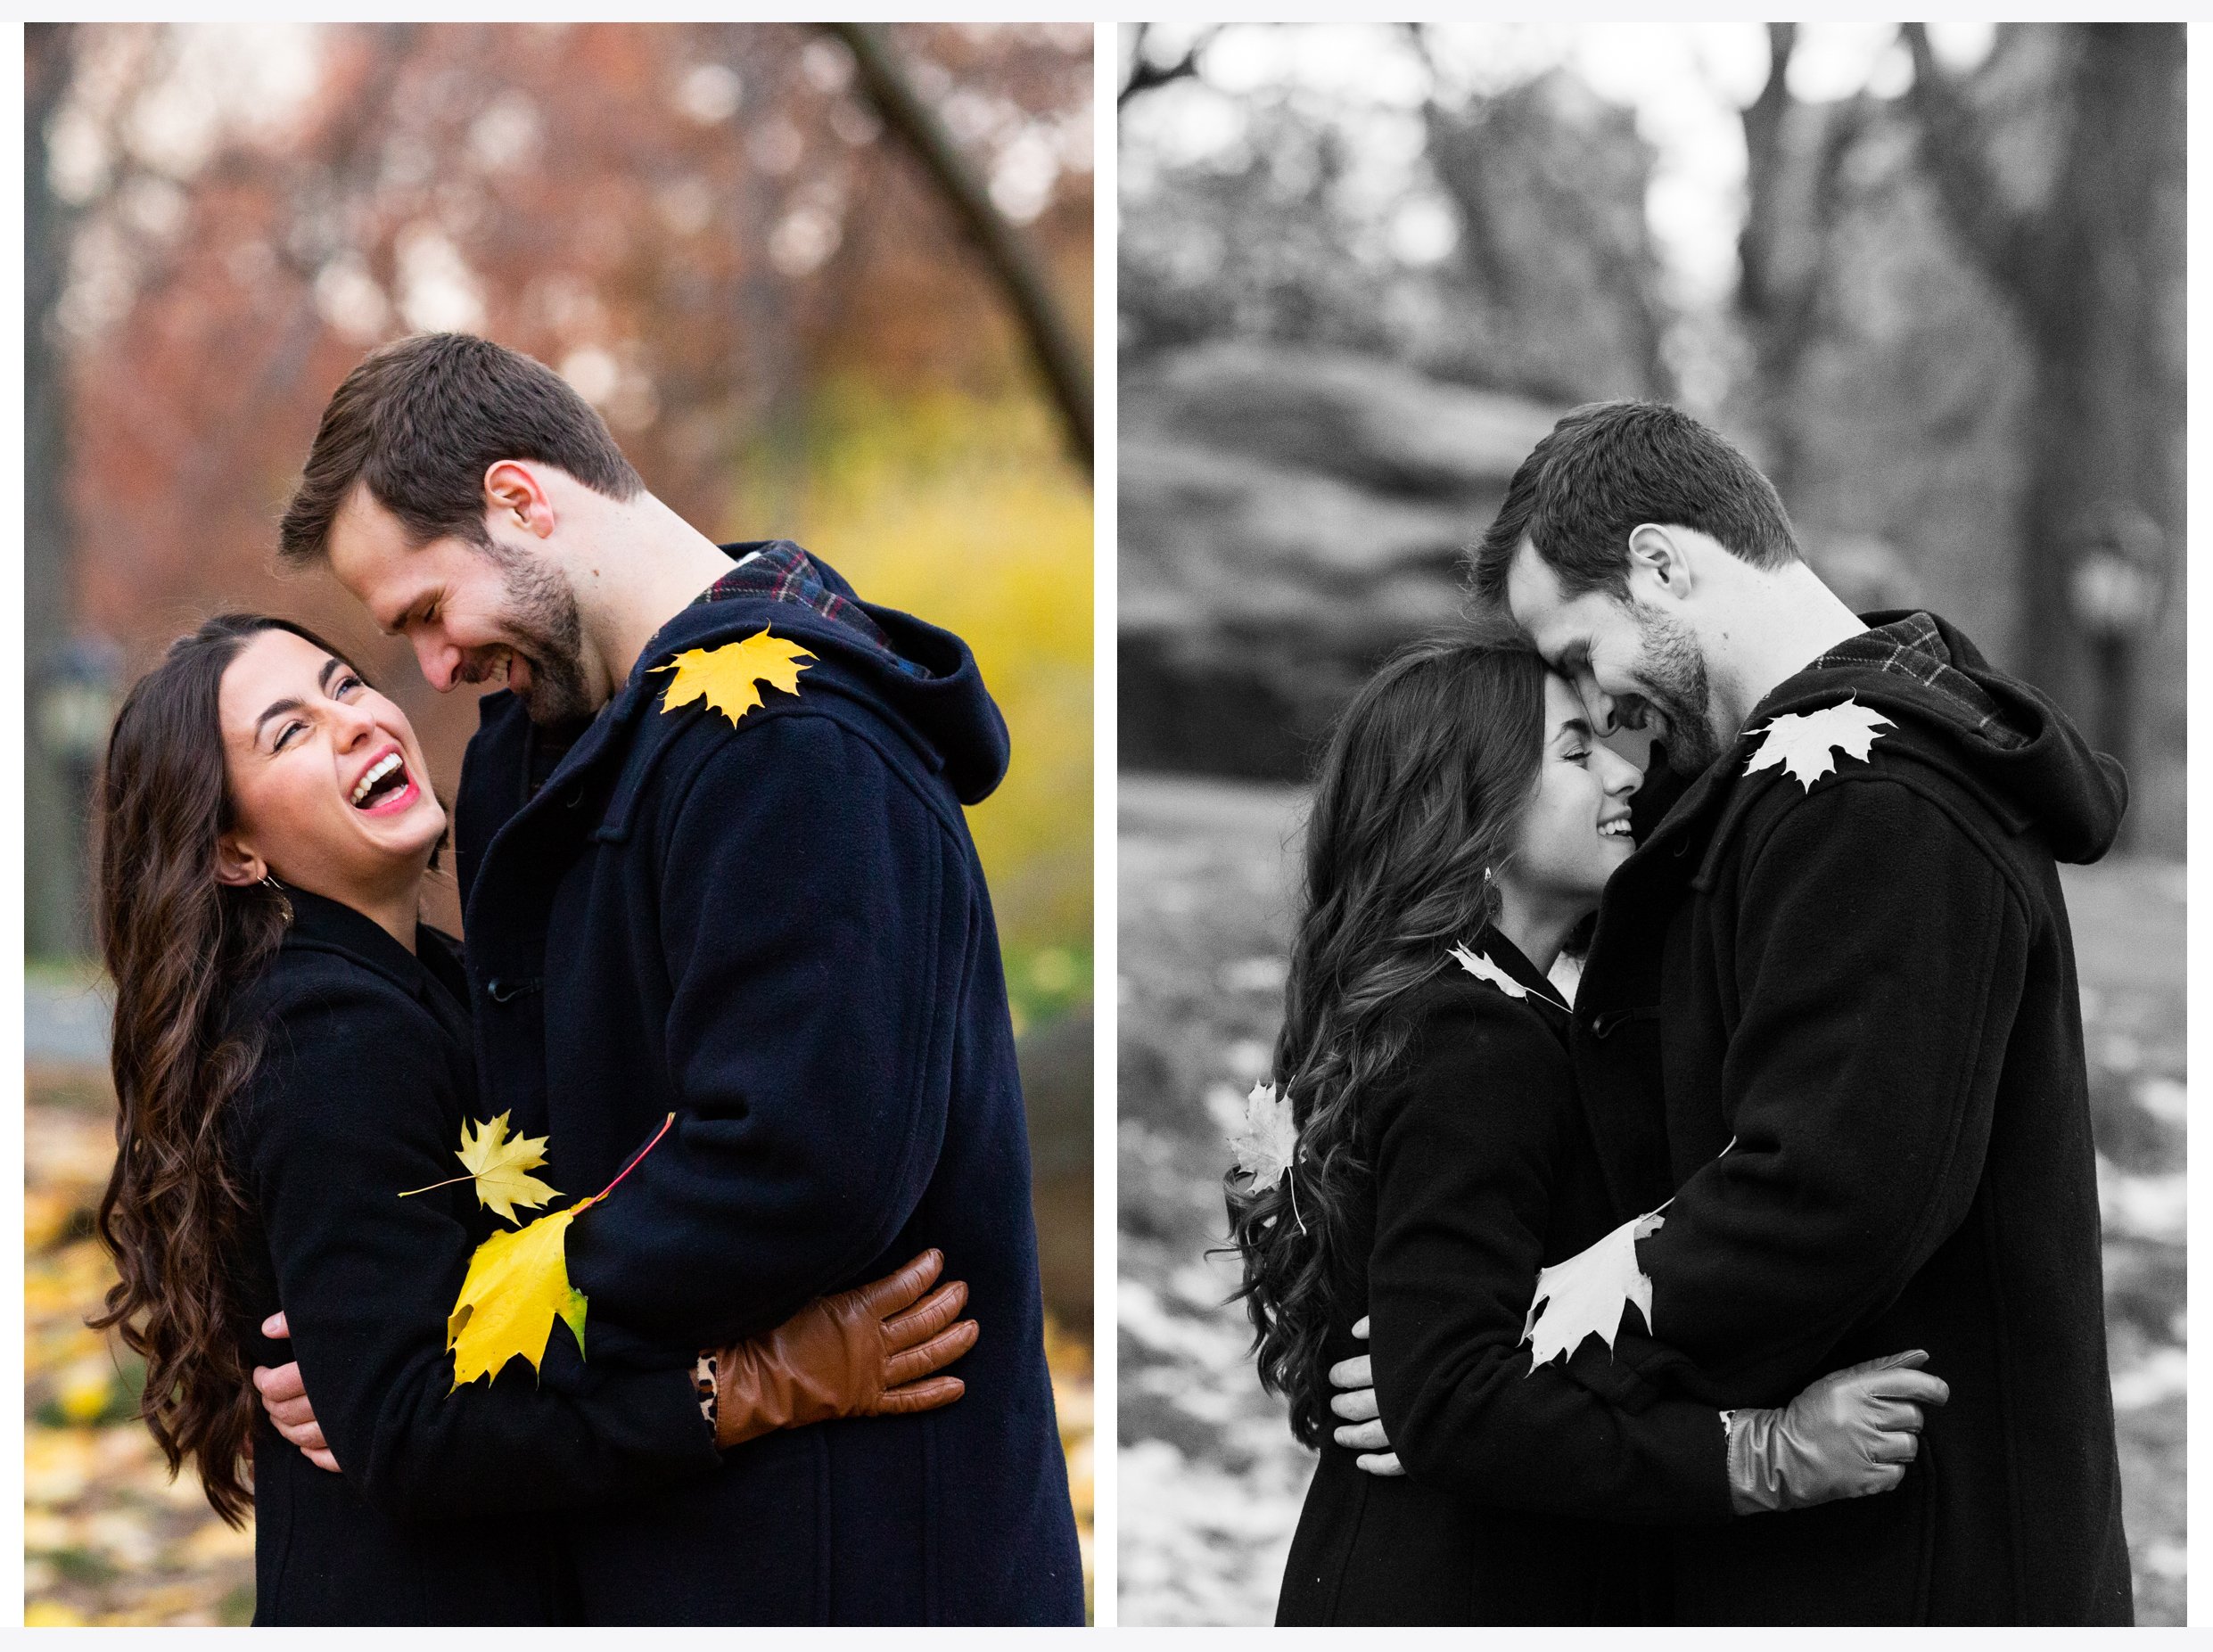 Central Park Fall Foliage Engagement Session NYC Photographer_0014.jpg